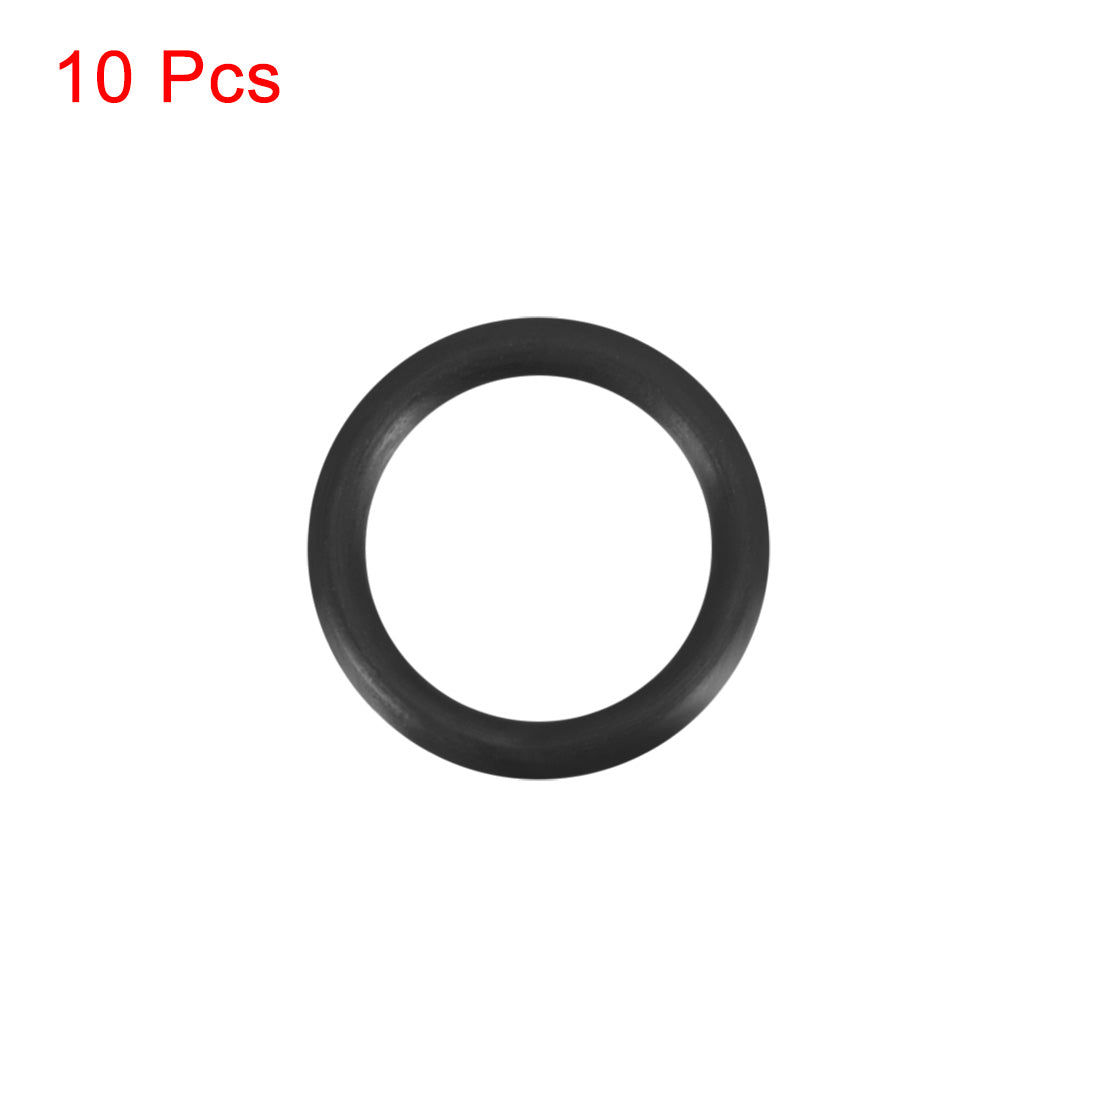 uxcell Uxcell O-Rings Nitrile Rubber 13mm x 17mm x 2mm Seal Rings Sealing Gasket 10pcs